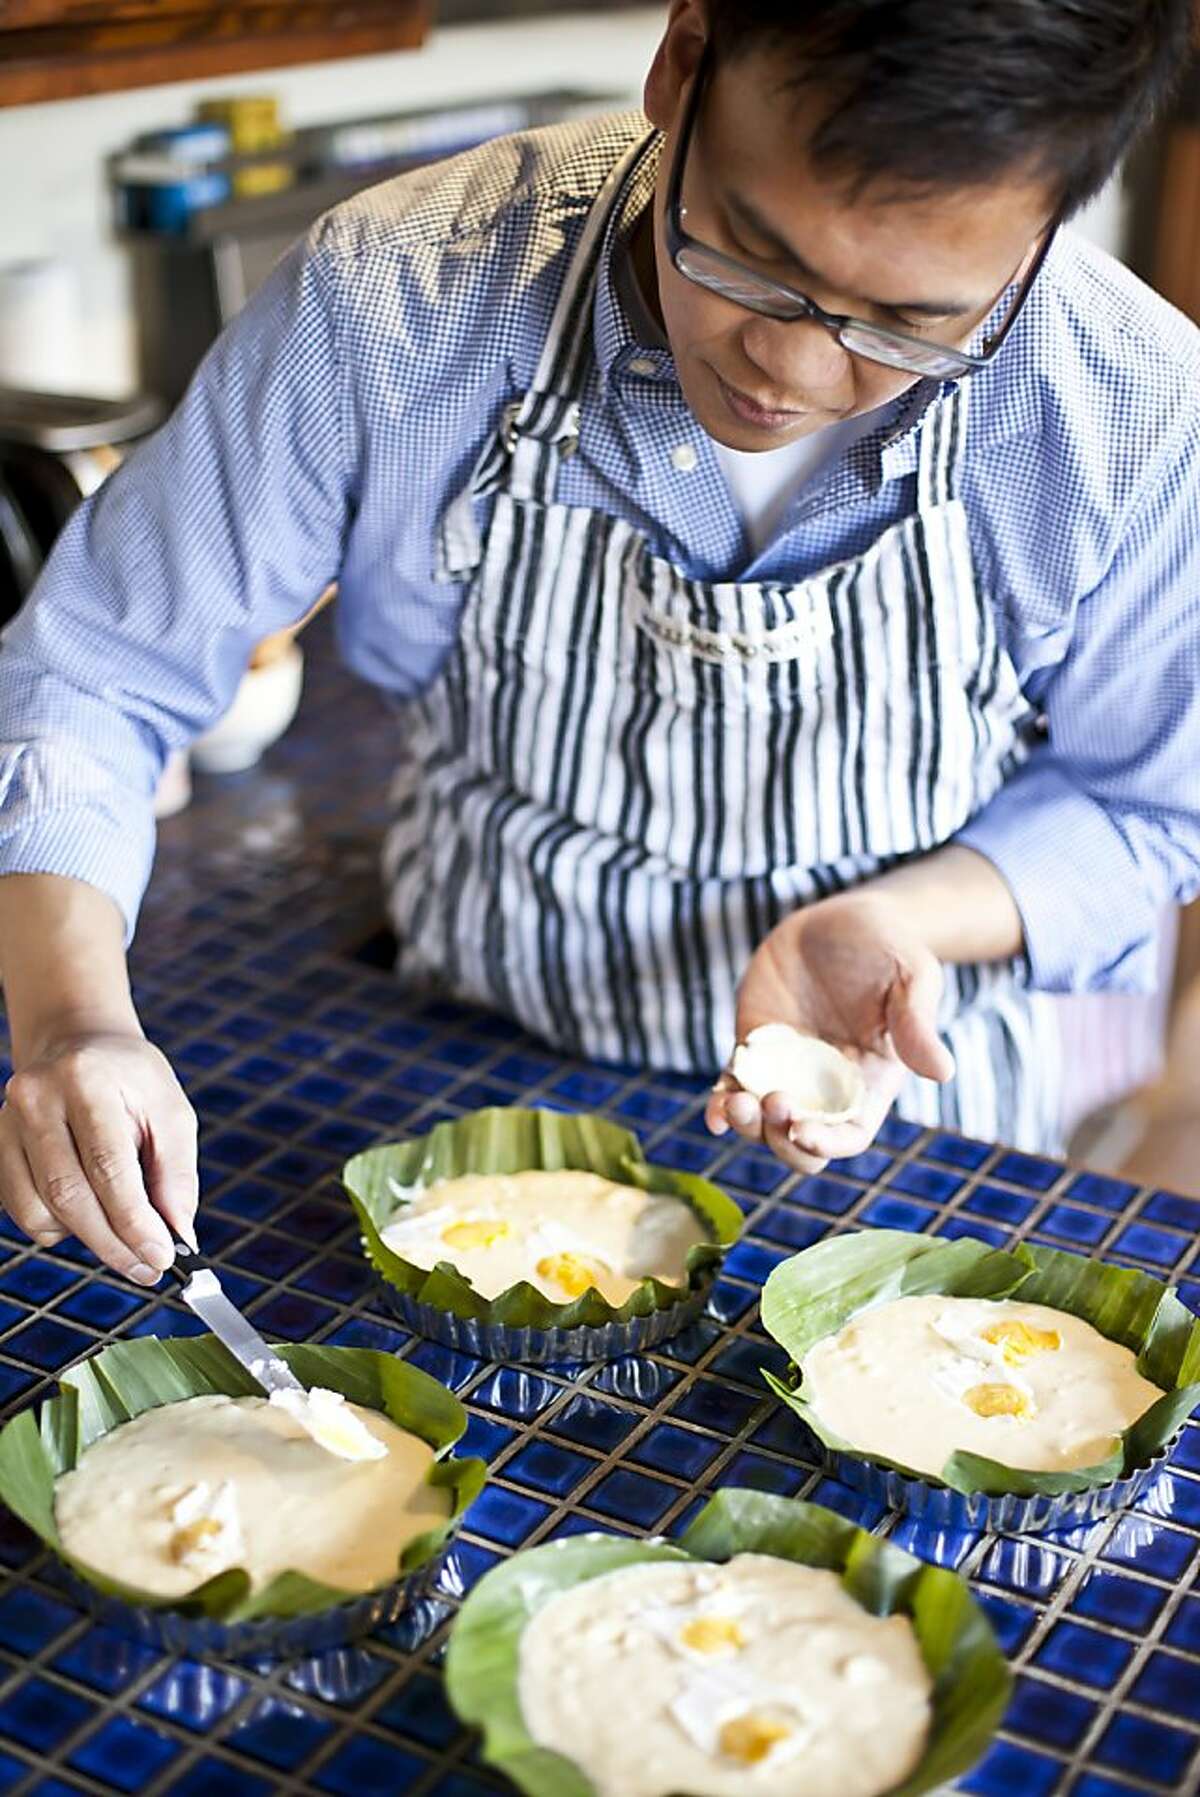 Jun Belen, professional food photographer and blogger, lays thin slices of salted egg on the bibingka batter at his home in Oakland, Calif. on Friday Dec. 2, 2011.